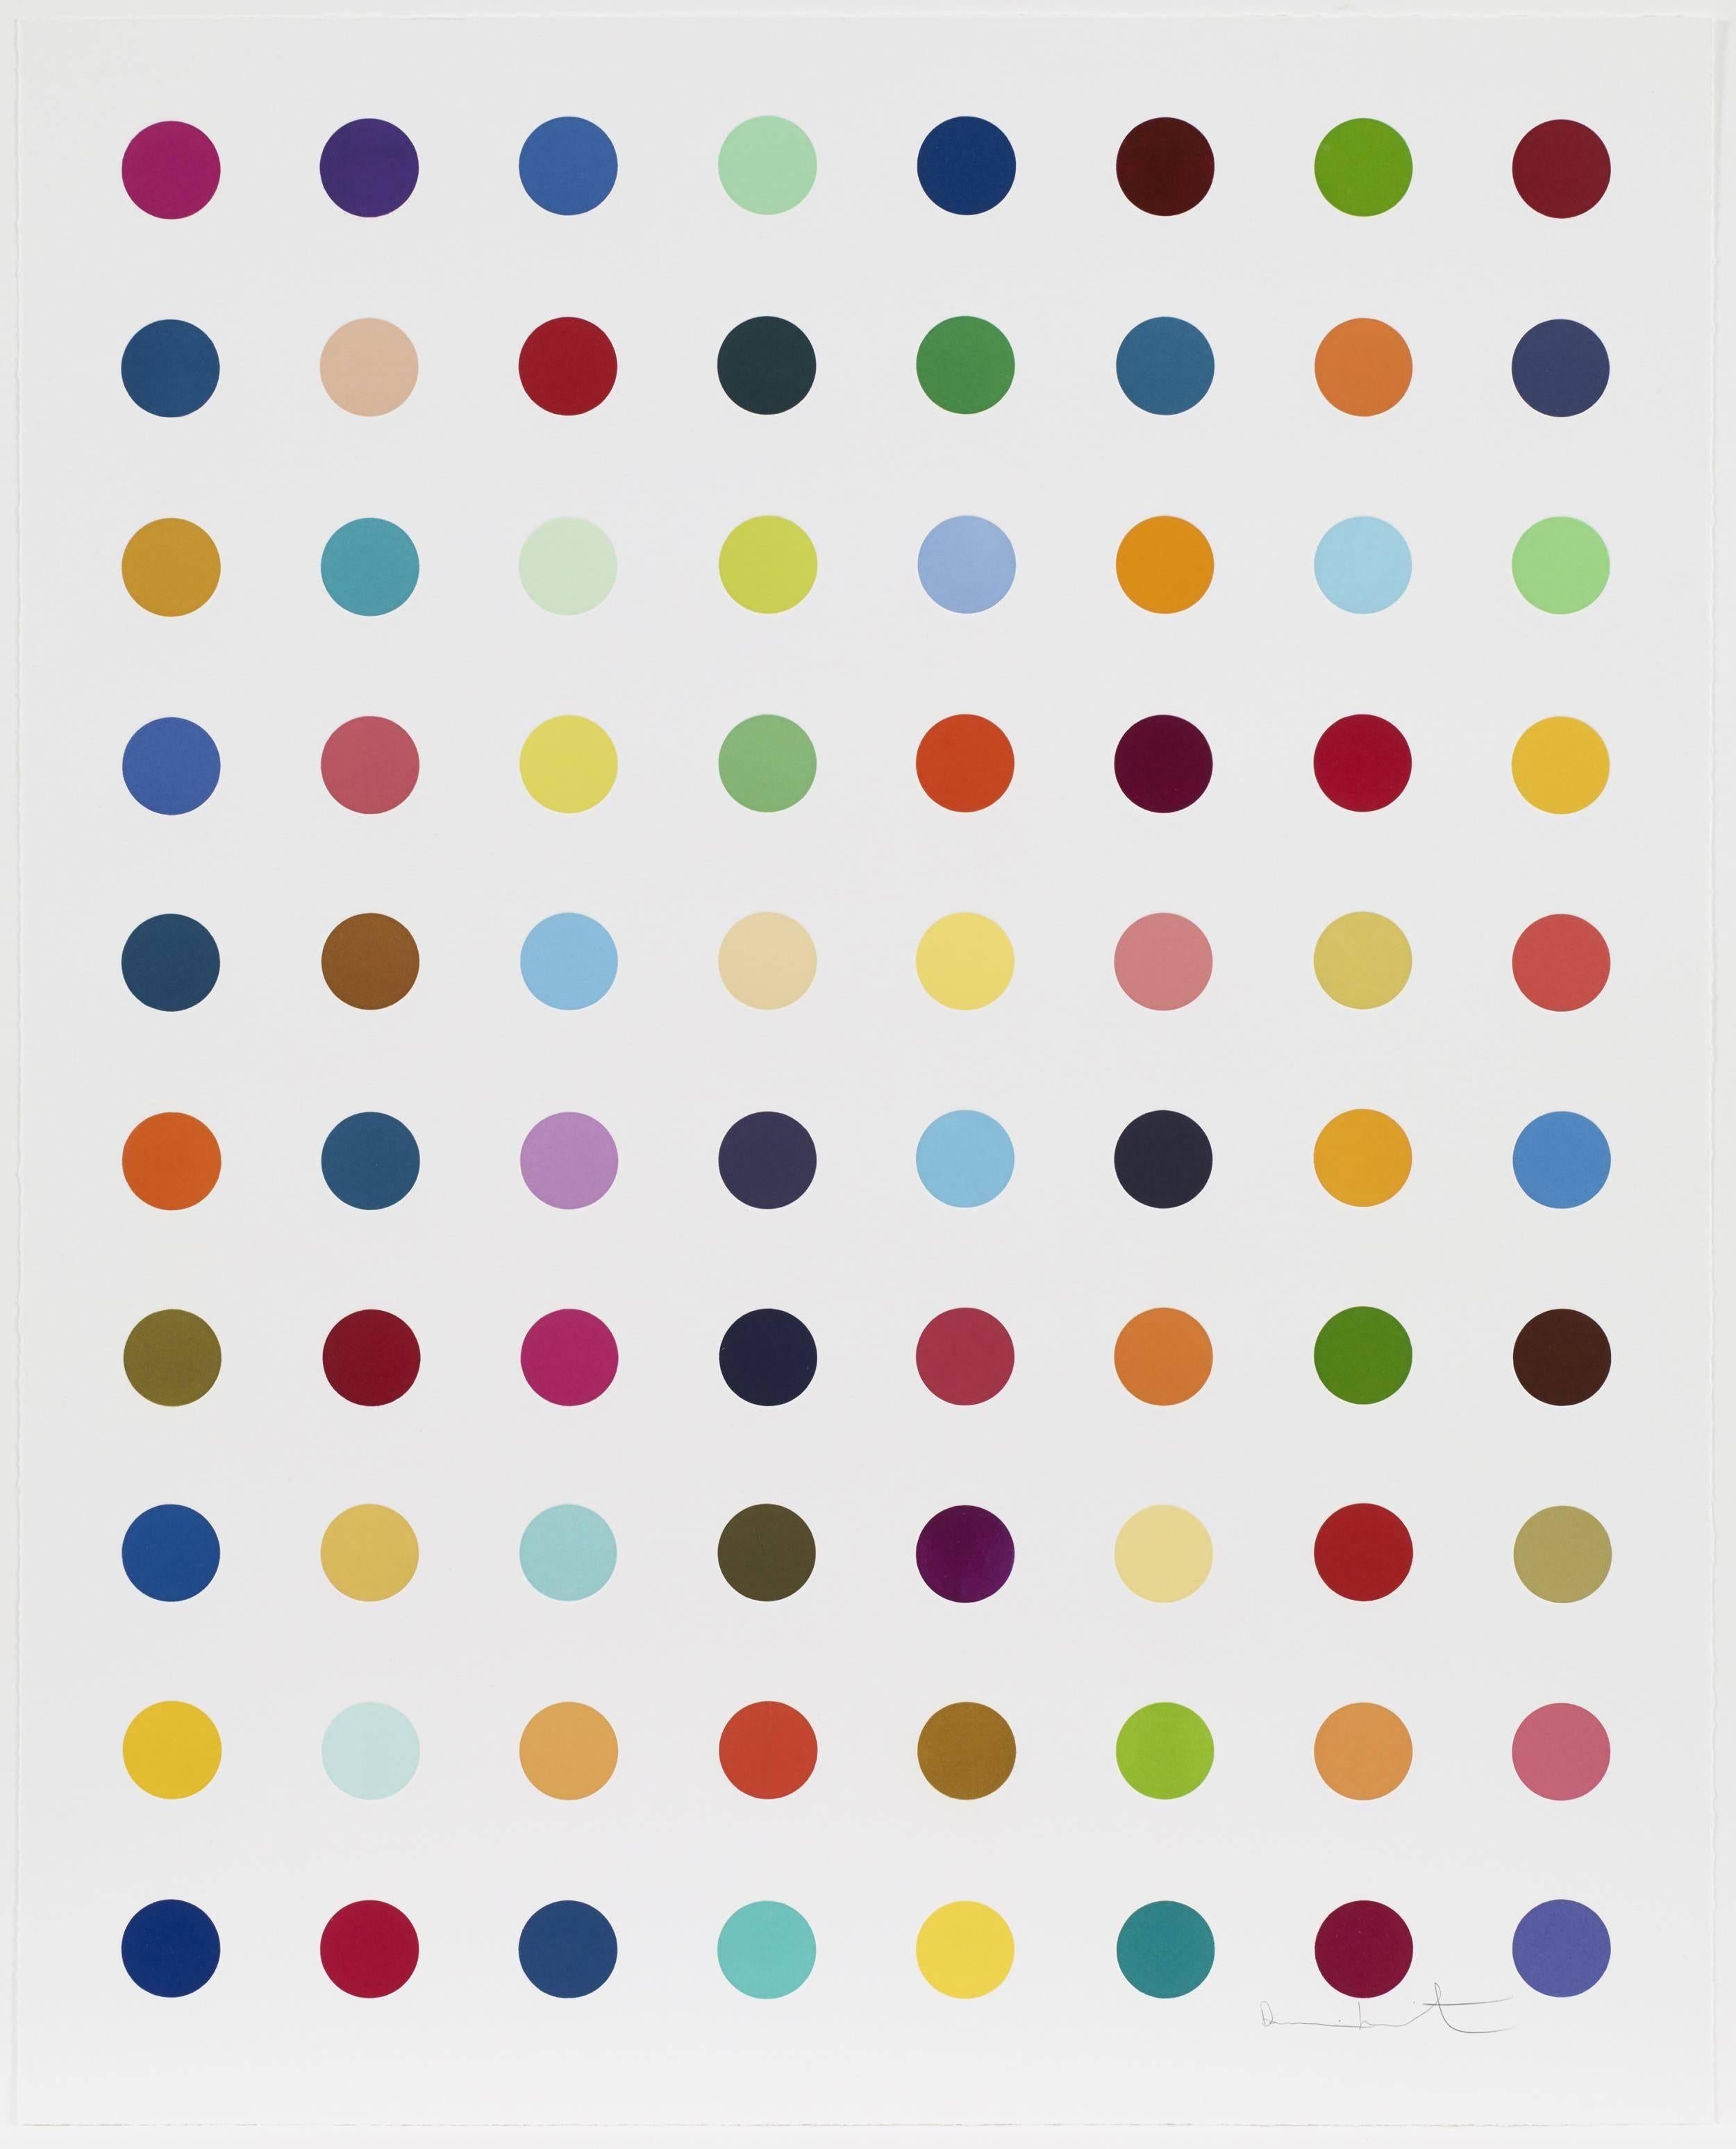 Gly-Gly-Ala - Print by Damien Hirst